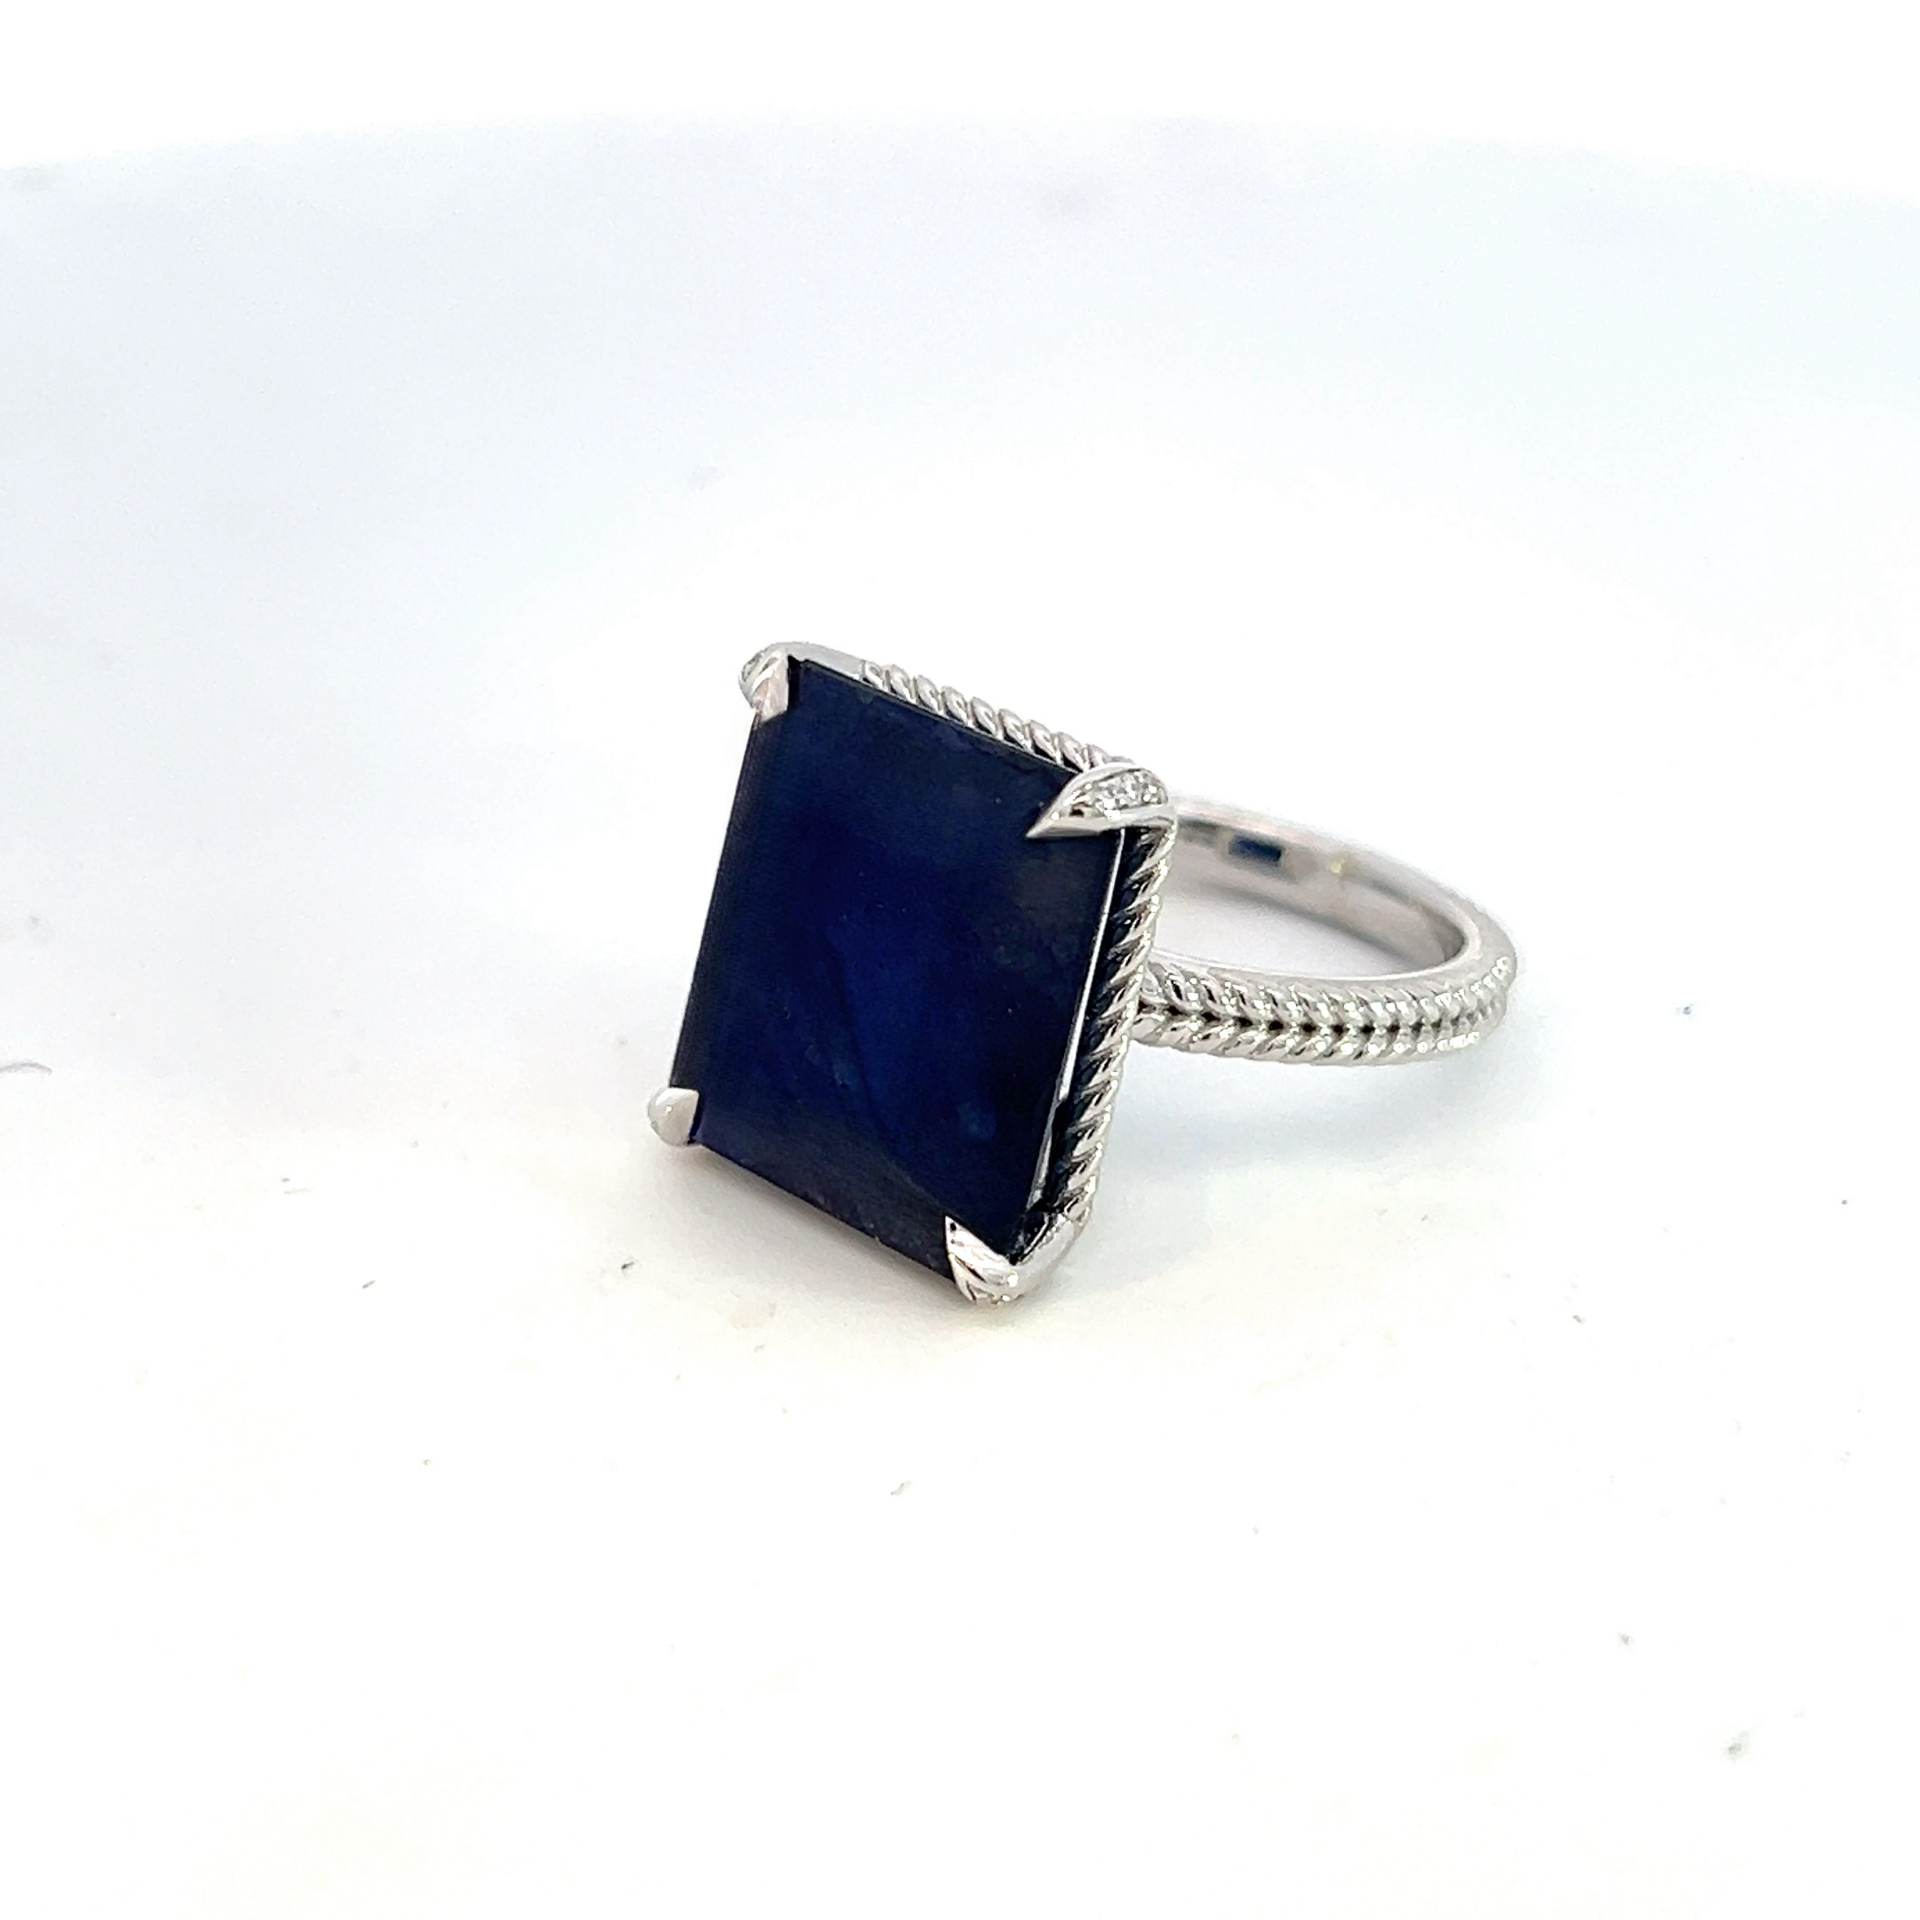 Natural Solitaire Sapphire Ring 6.5 14k W Gold 7 TCW Certified $3,150 310545 - Certified Fine Jewelry